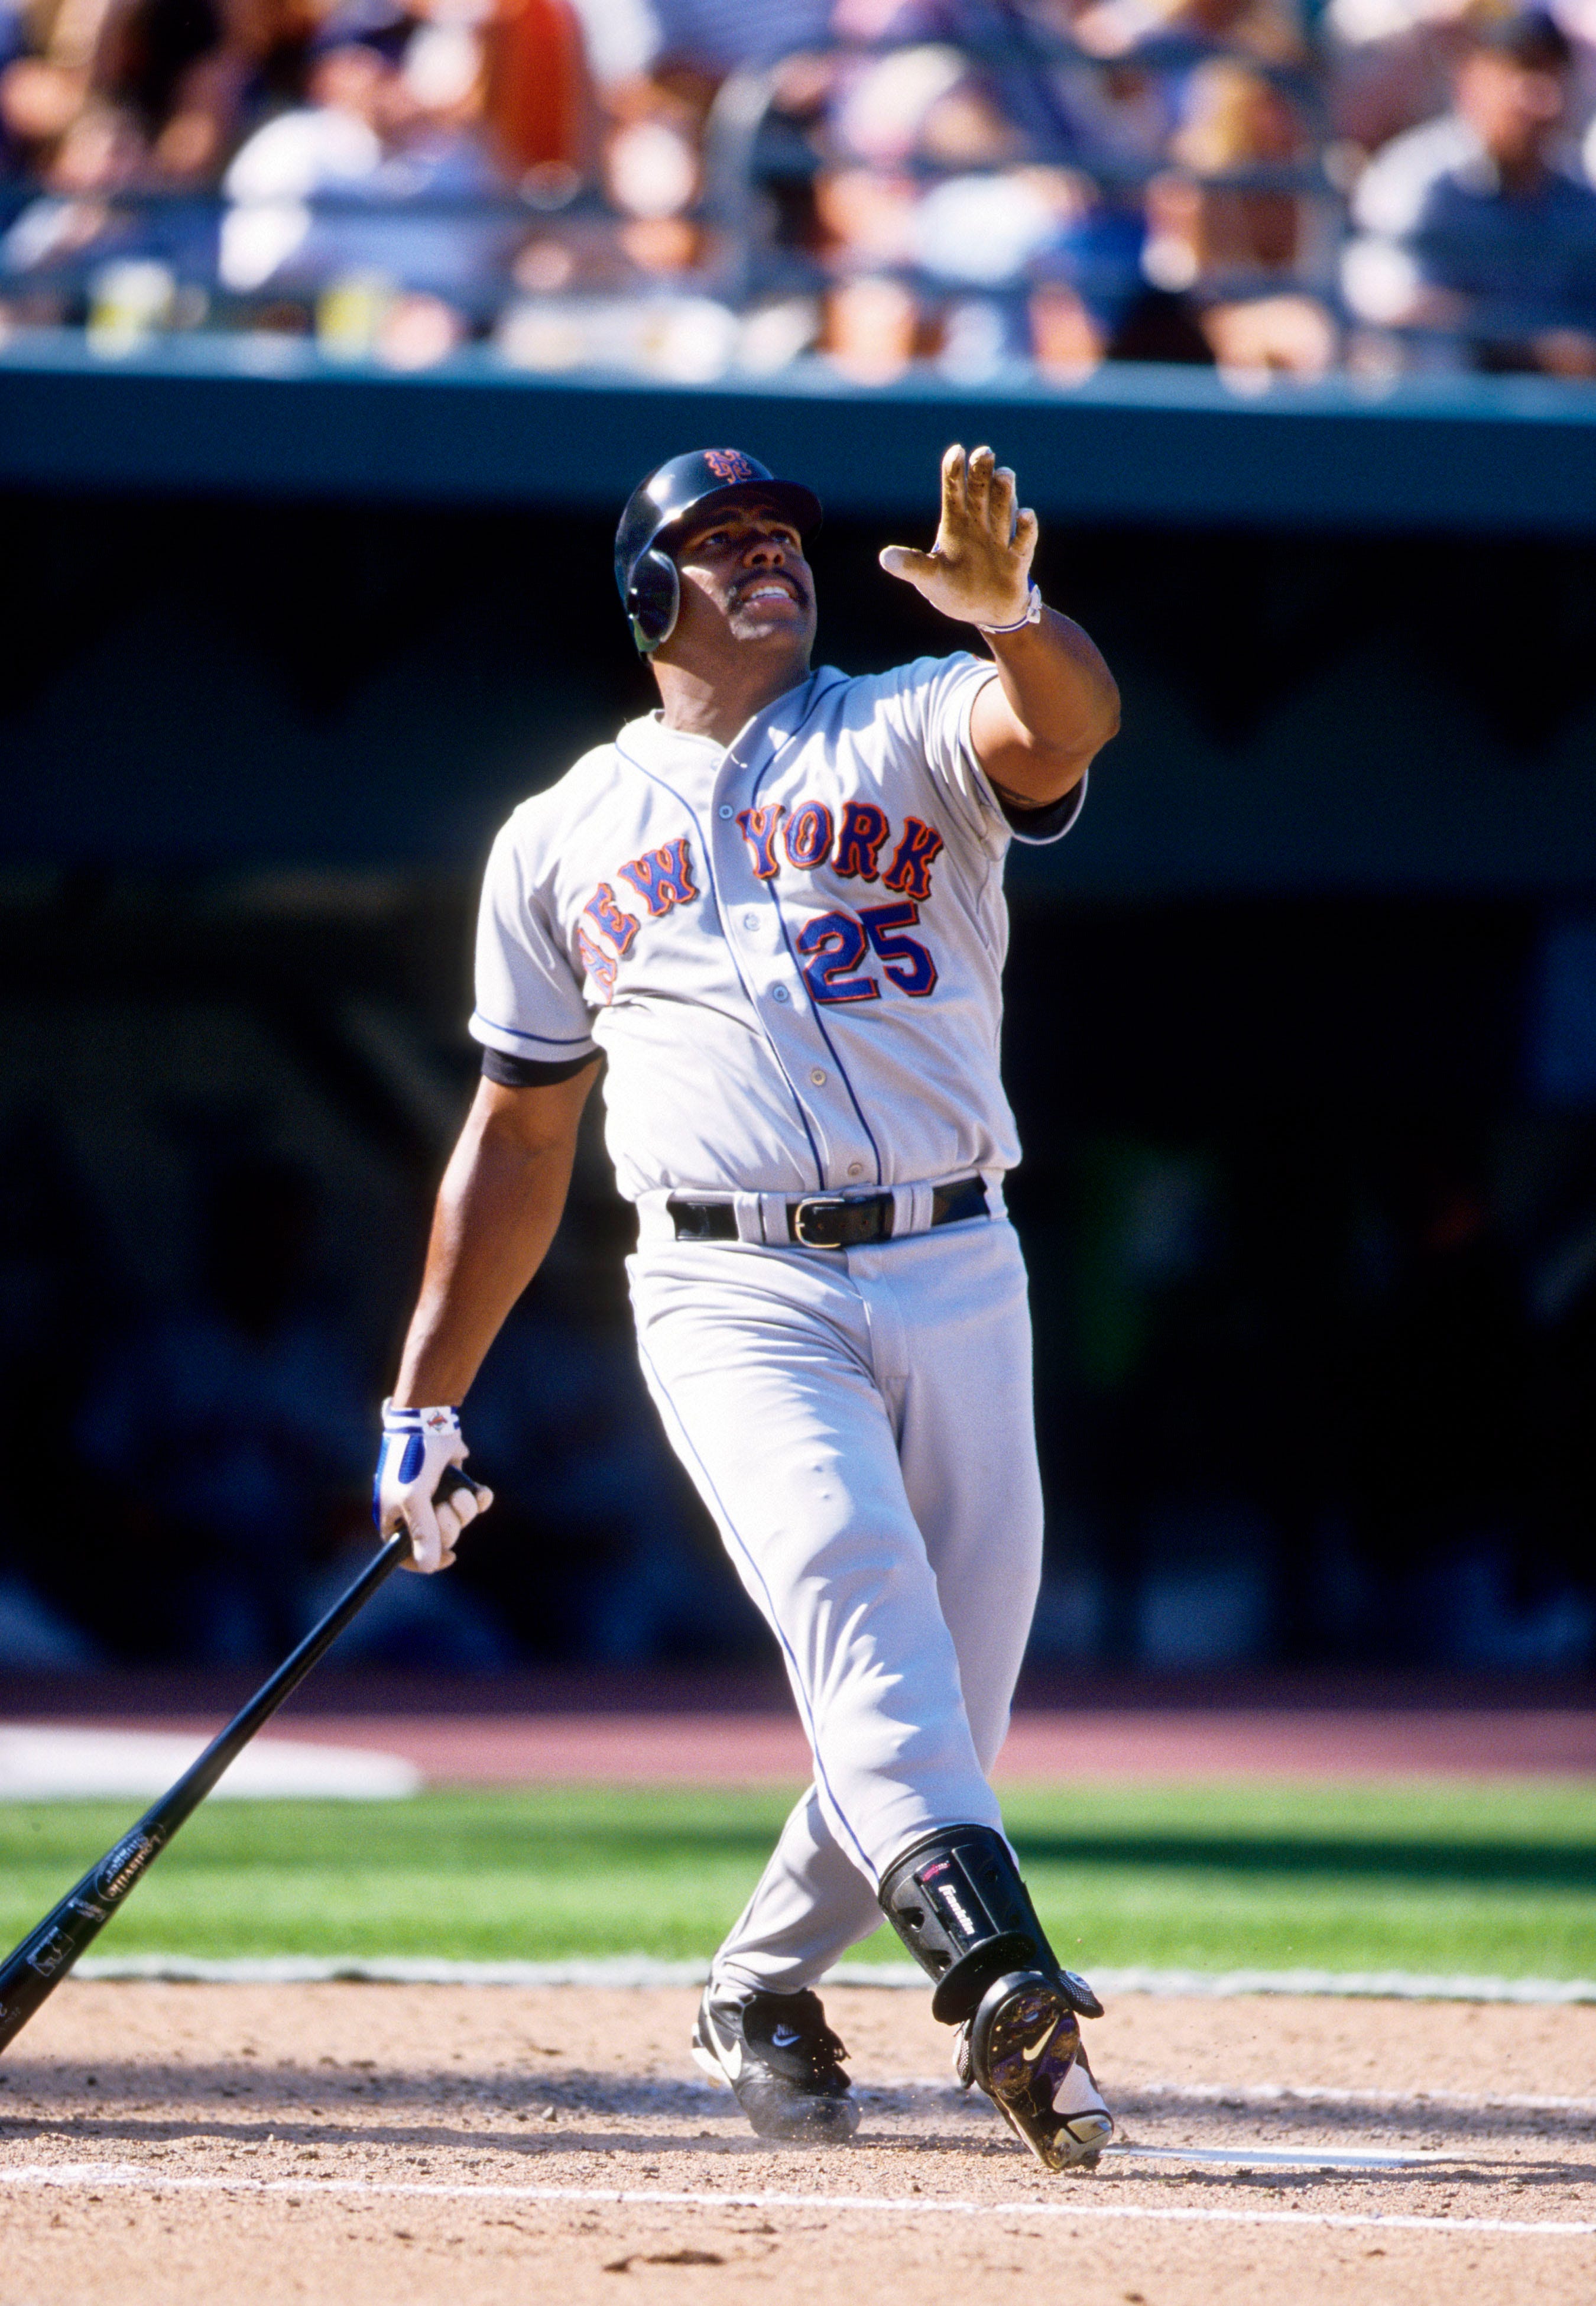 Mets are unfairly judged yearly on 'Bobby Bonilla Day